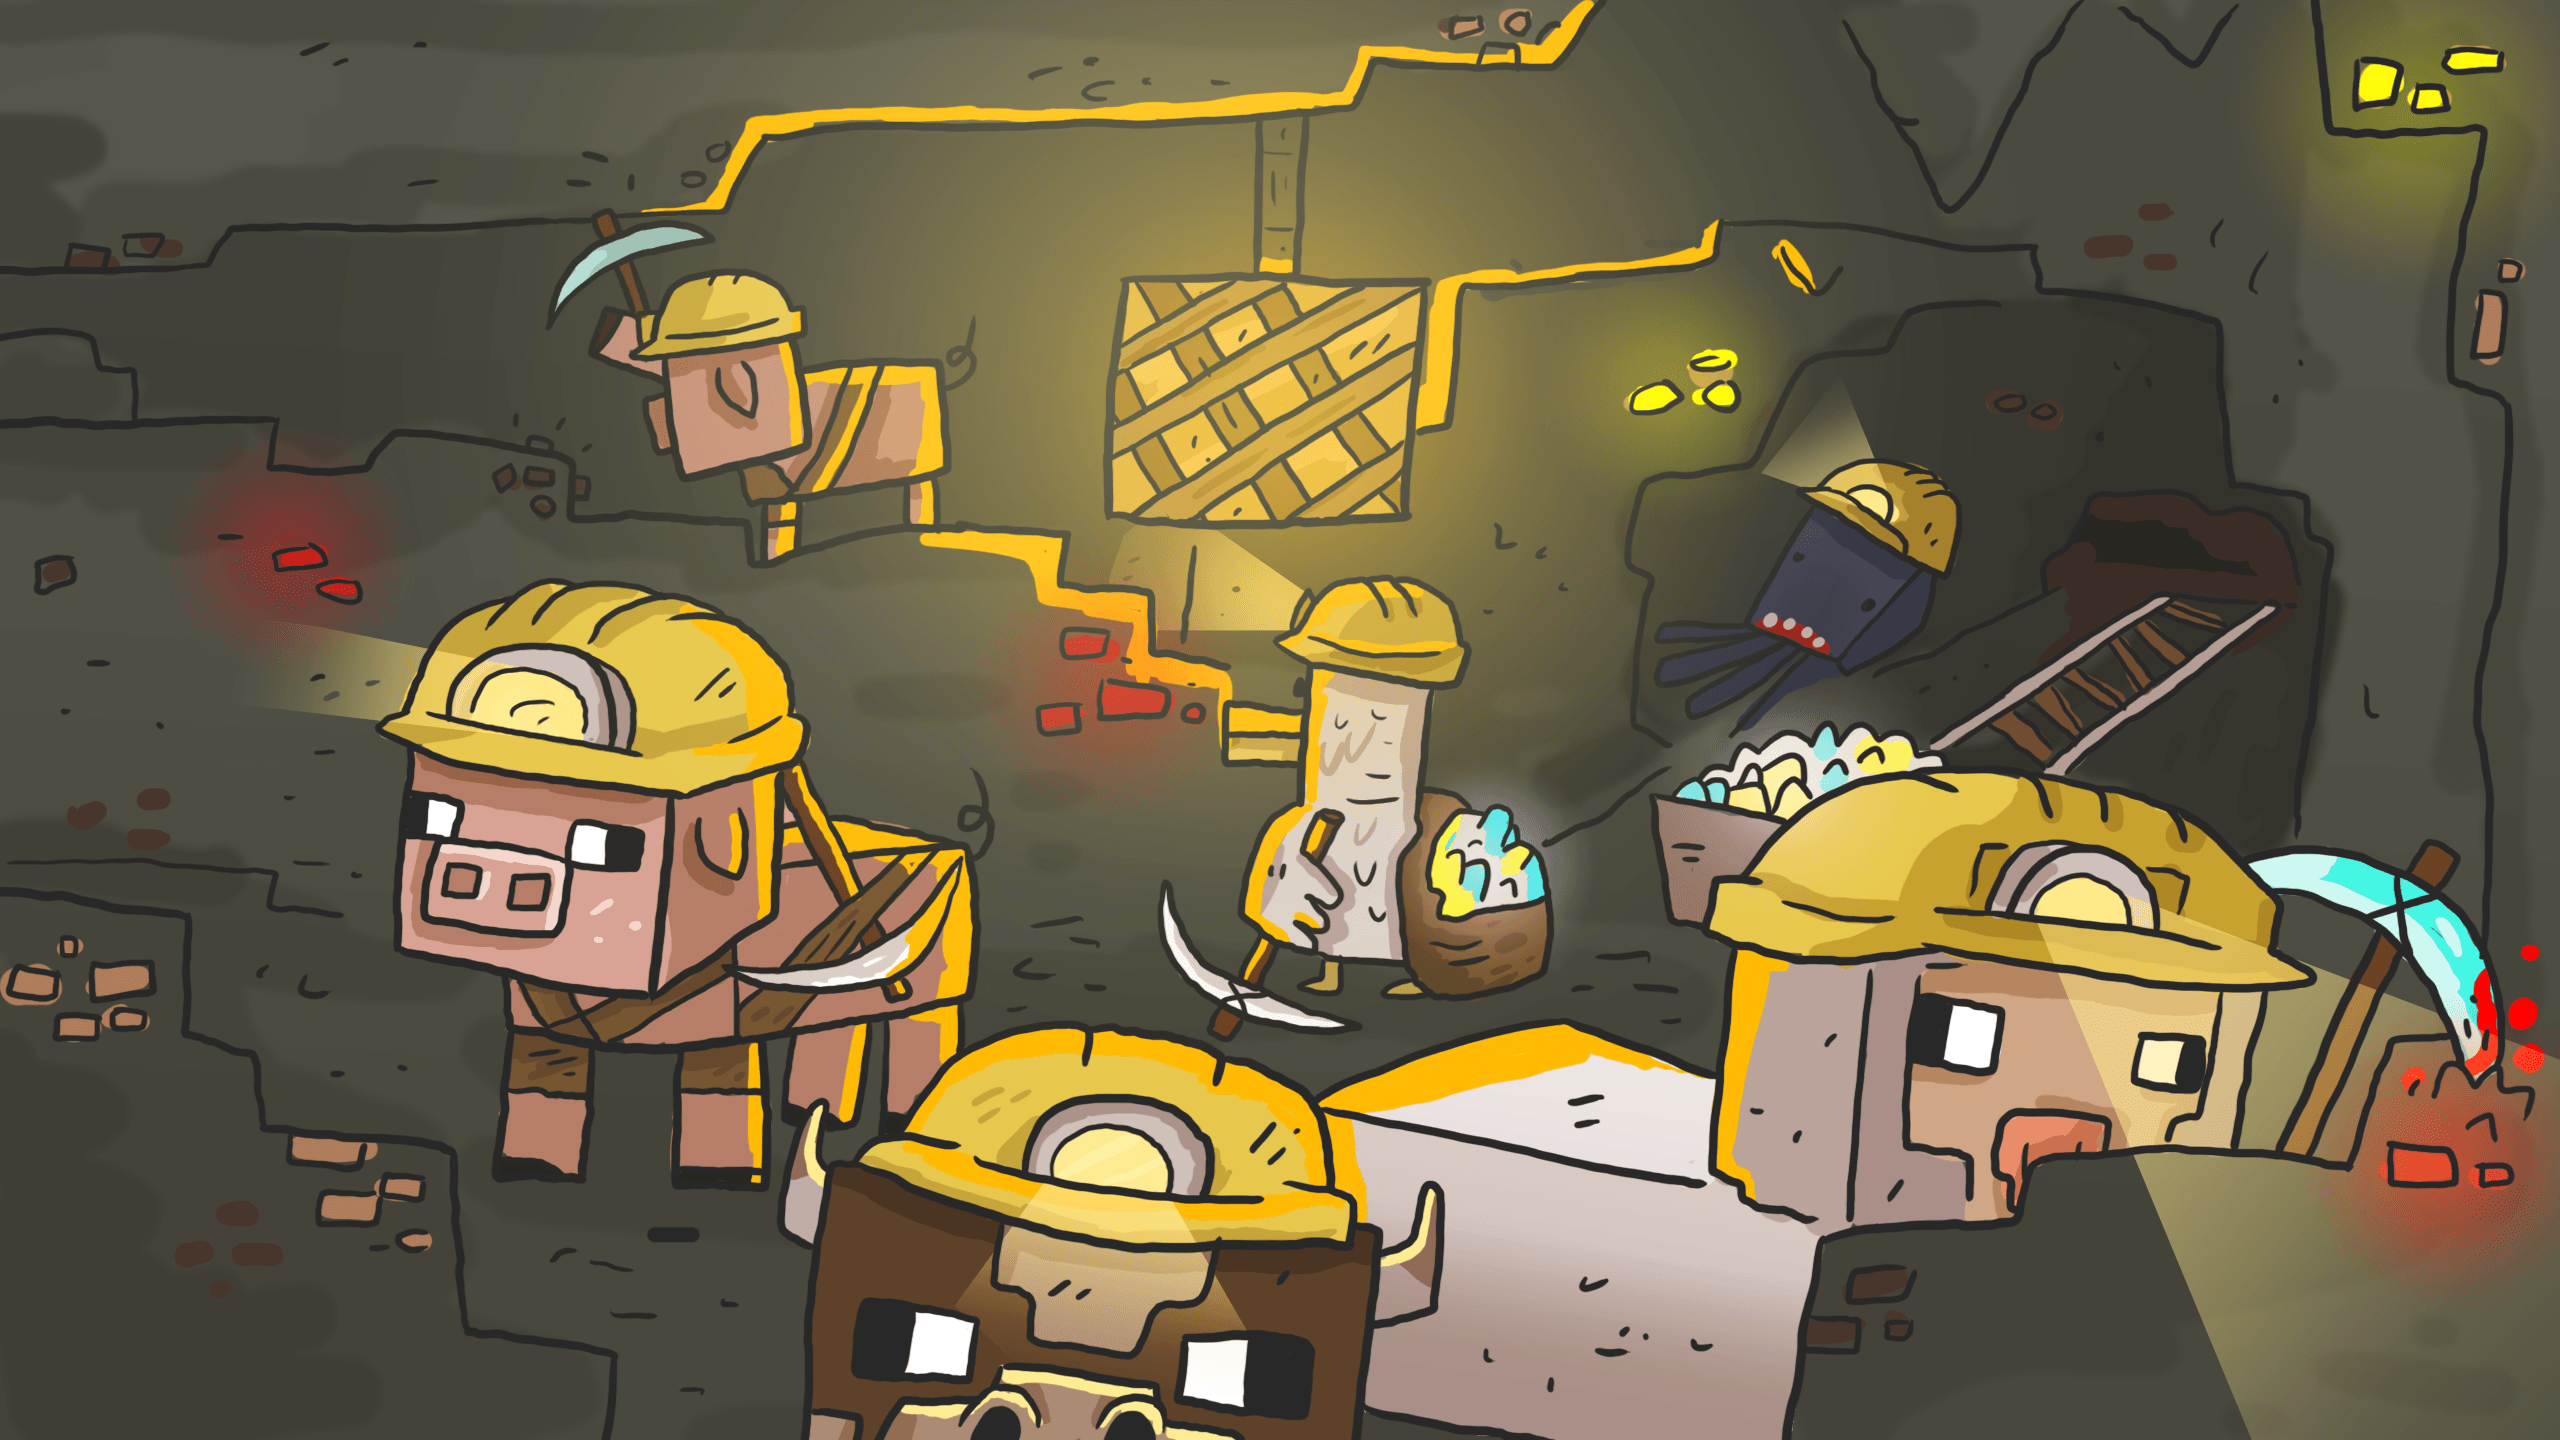 Minecraft draw dungeon Wallpaper with a mining Sheep, Cow, Squid